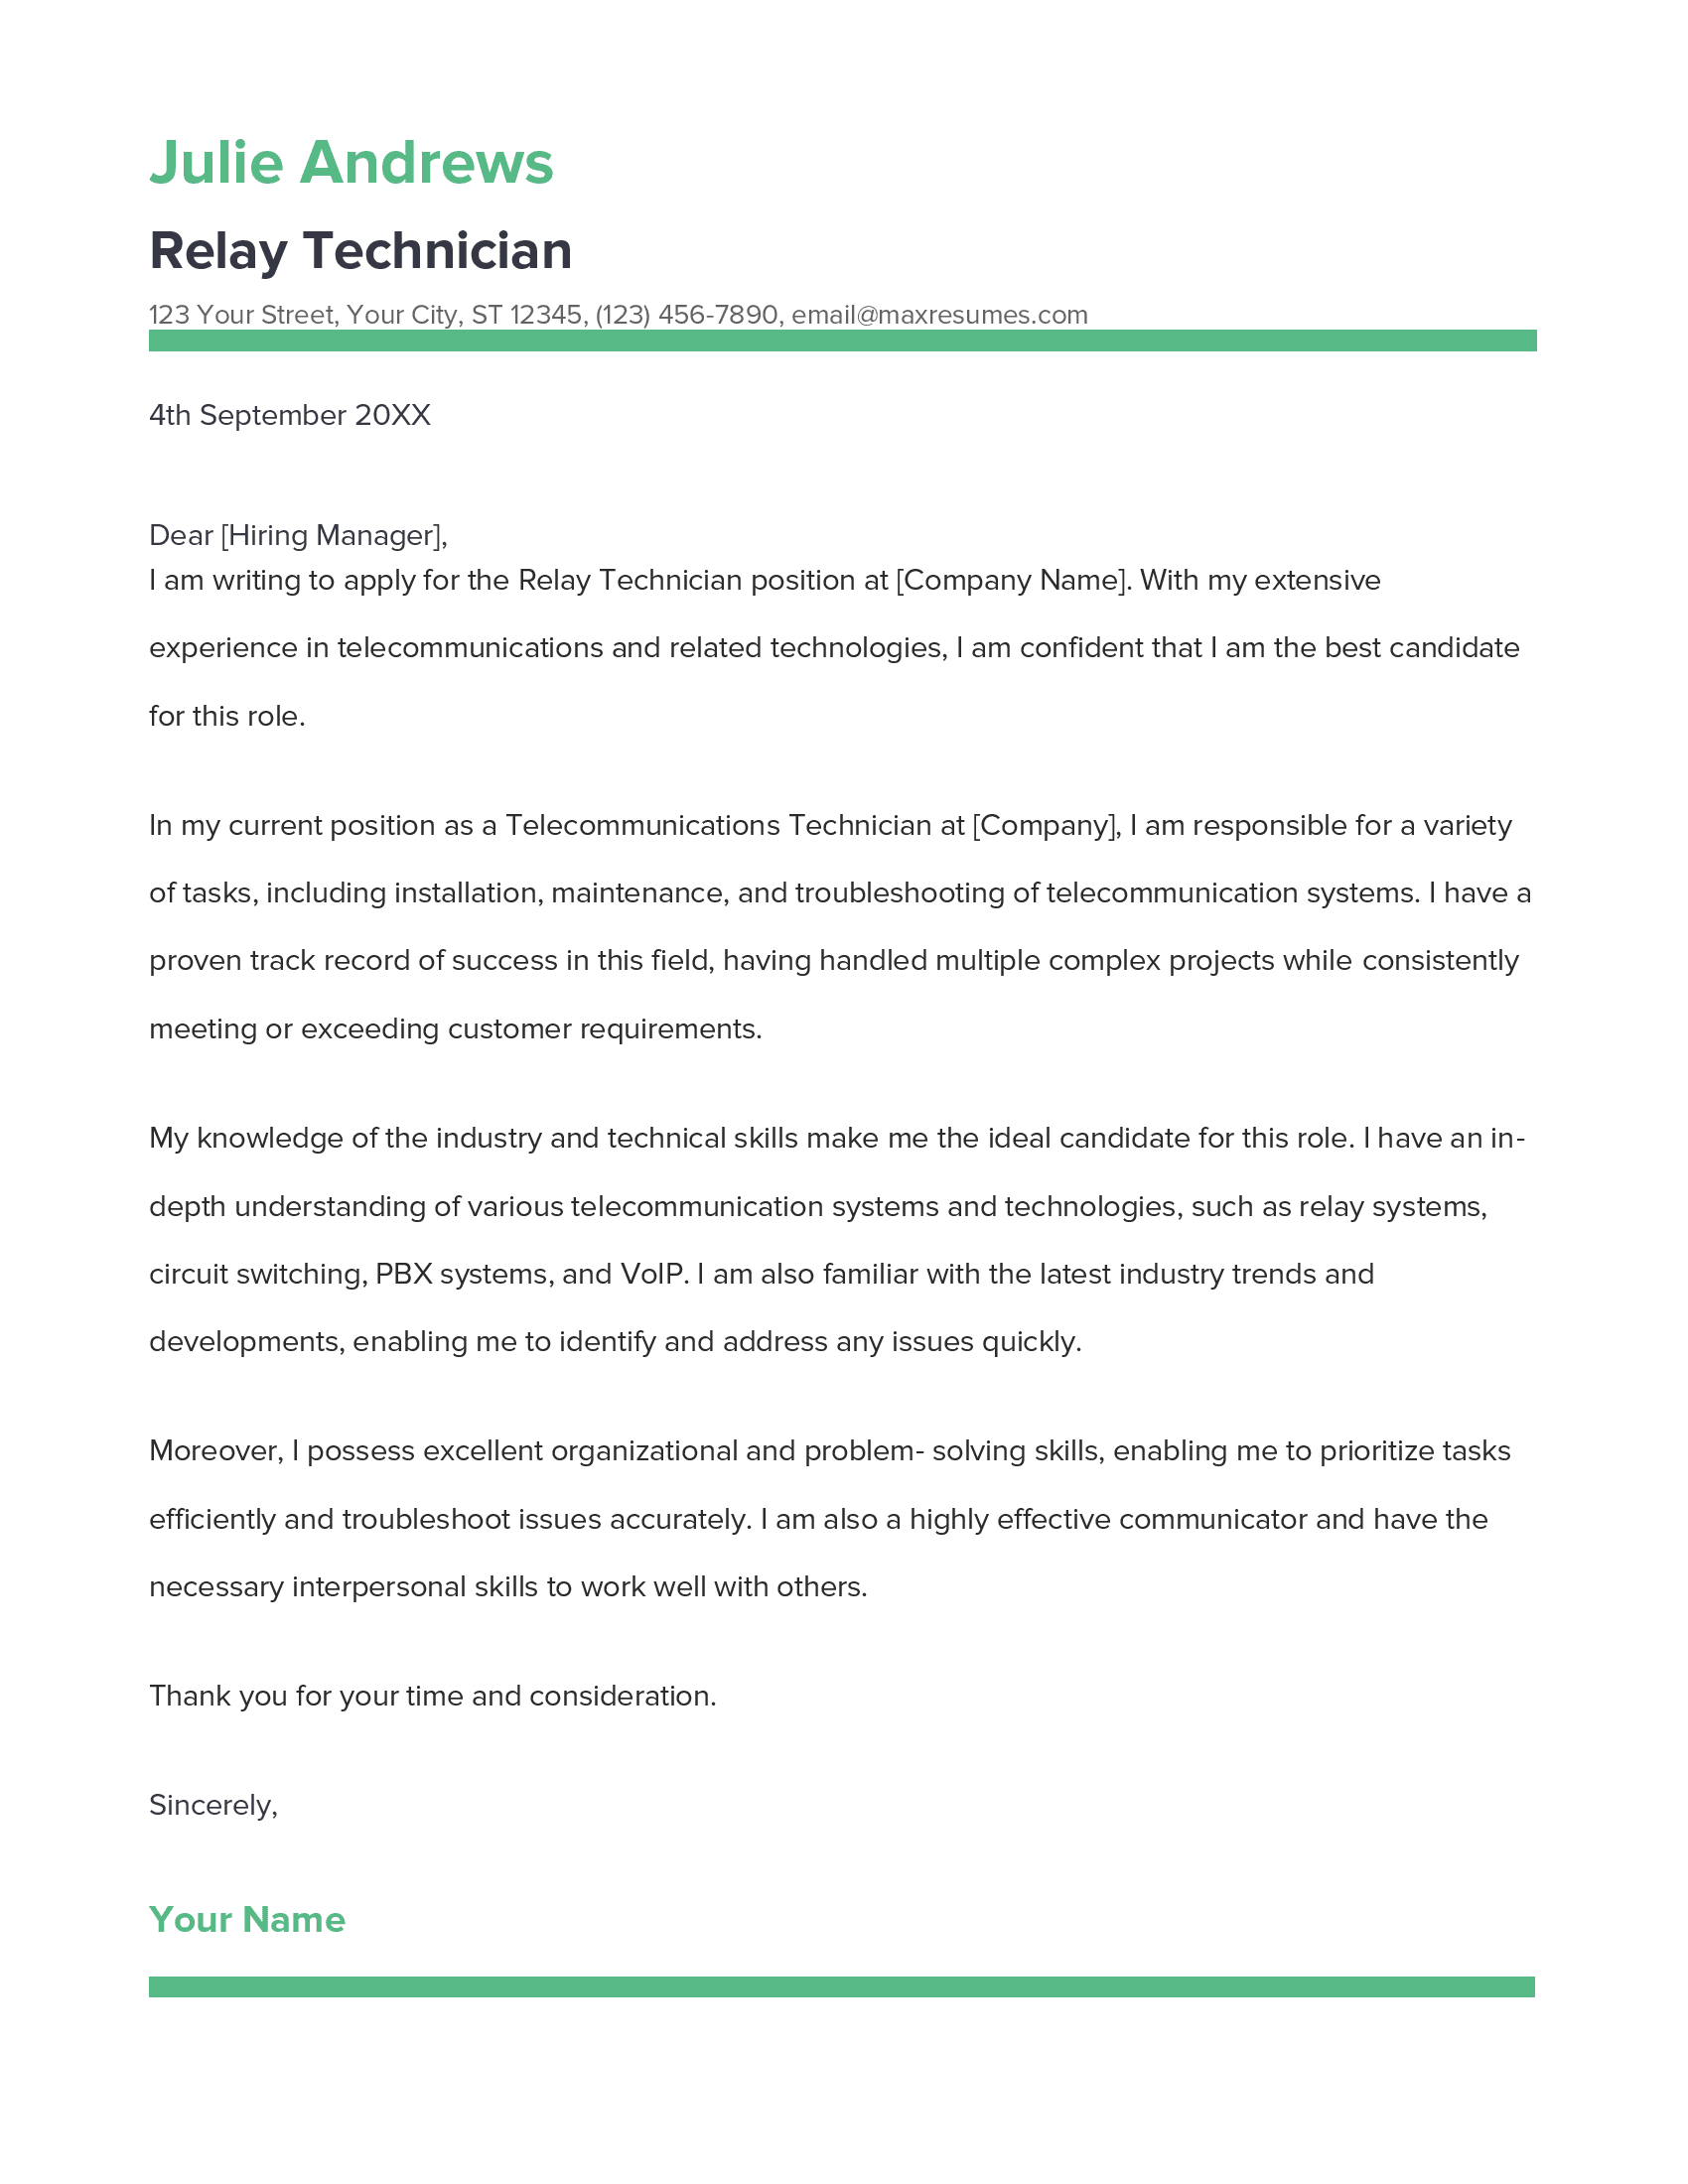 Relay Technician Cover Letter Example